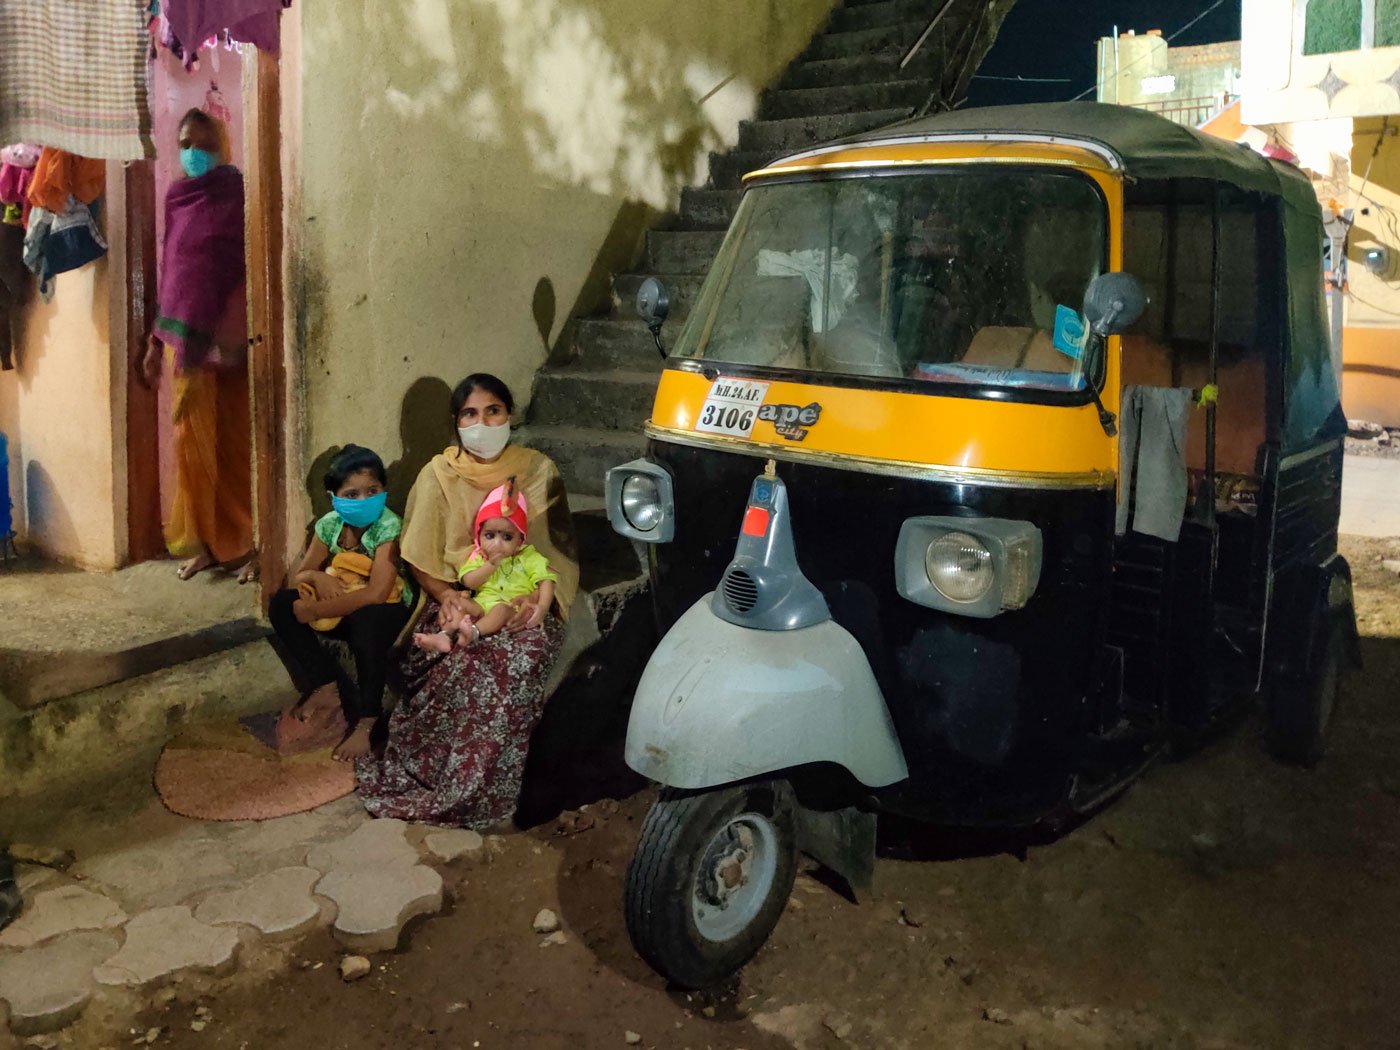 Ragini Phadke with her children outside their one-room home in Parli. The autorickshaw is the family's only source of income